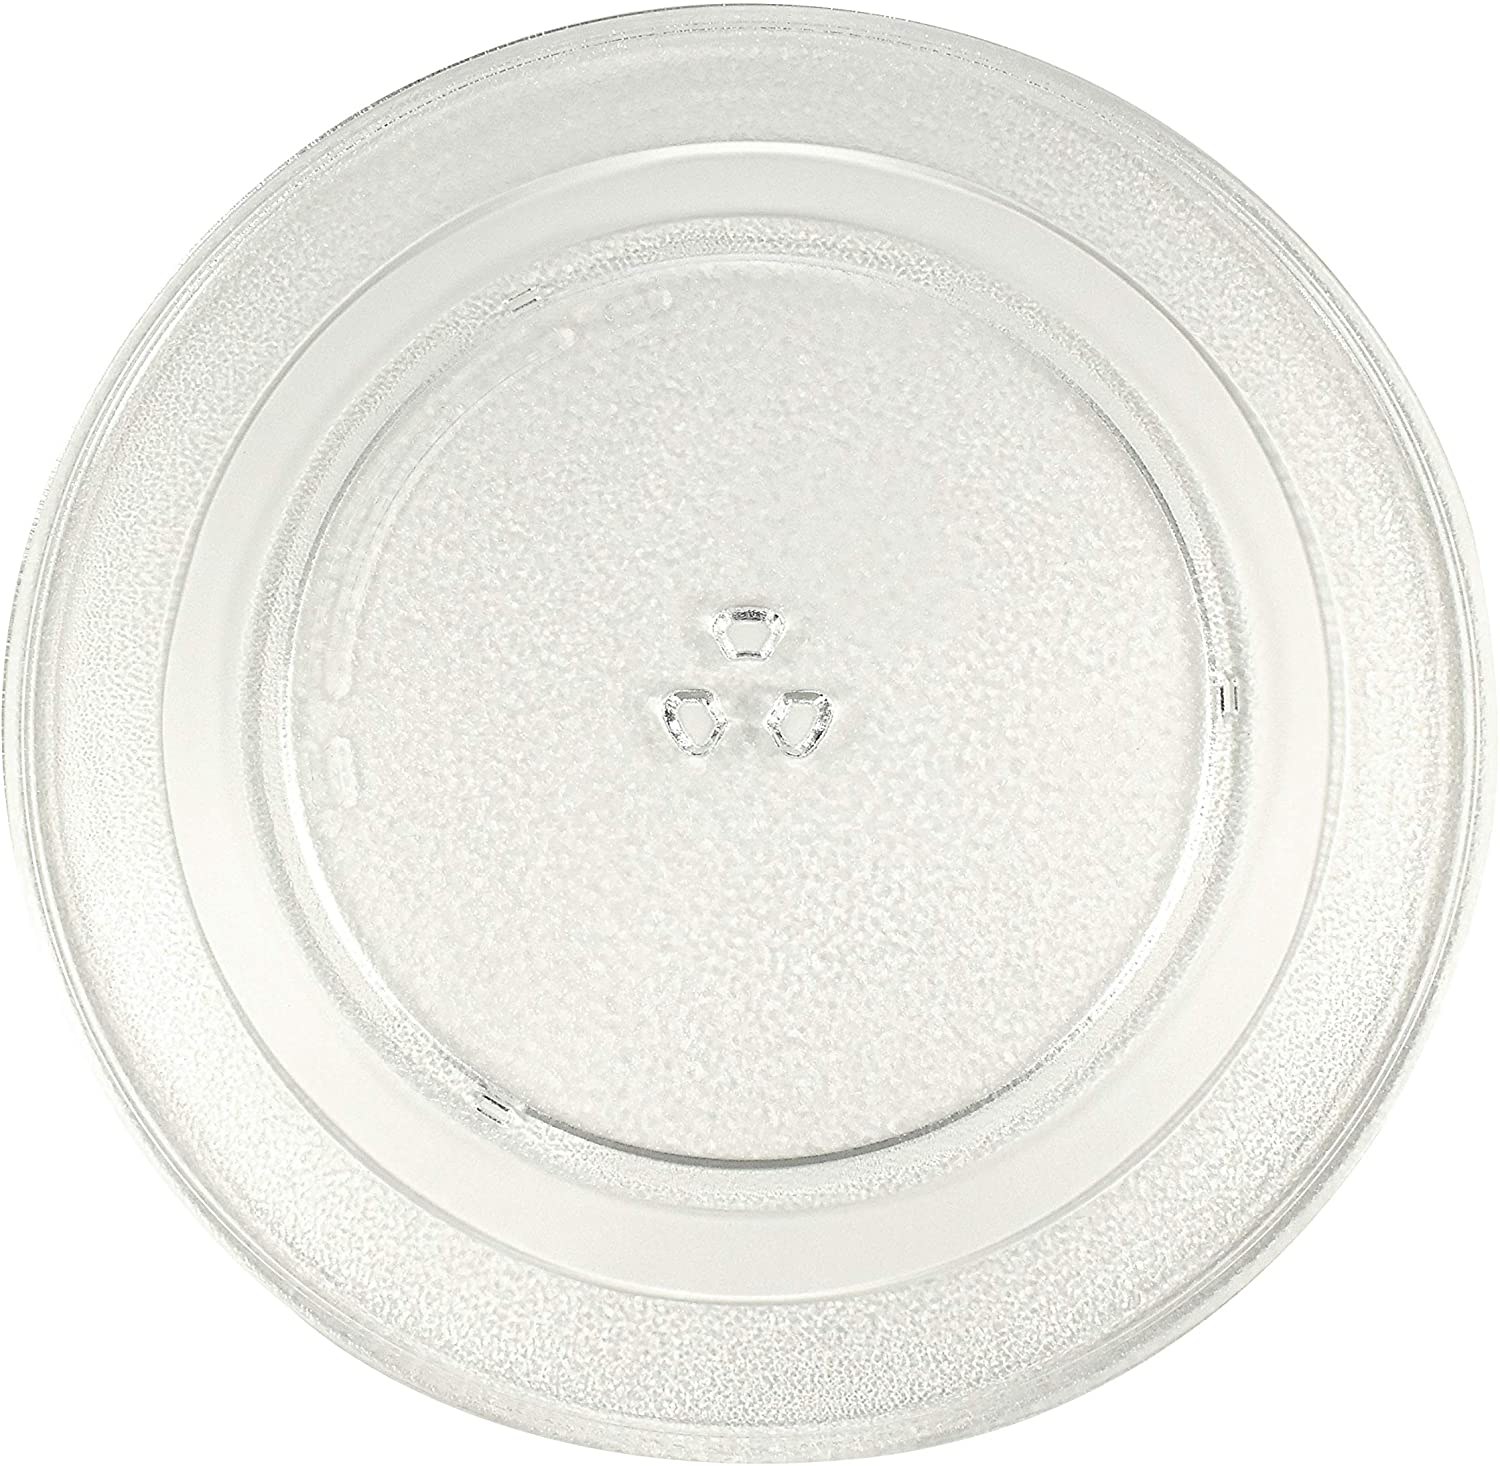 HQRP 15" Glass Turntable Tray Compatible with Sharp Carousel 9KC3517207700 R551 R-551Z R-551ZS R-551ZM R559 R-559Y R-559YK R-559YW